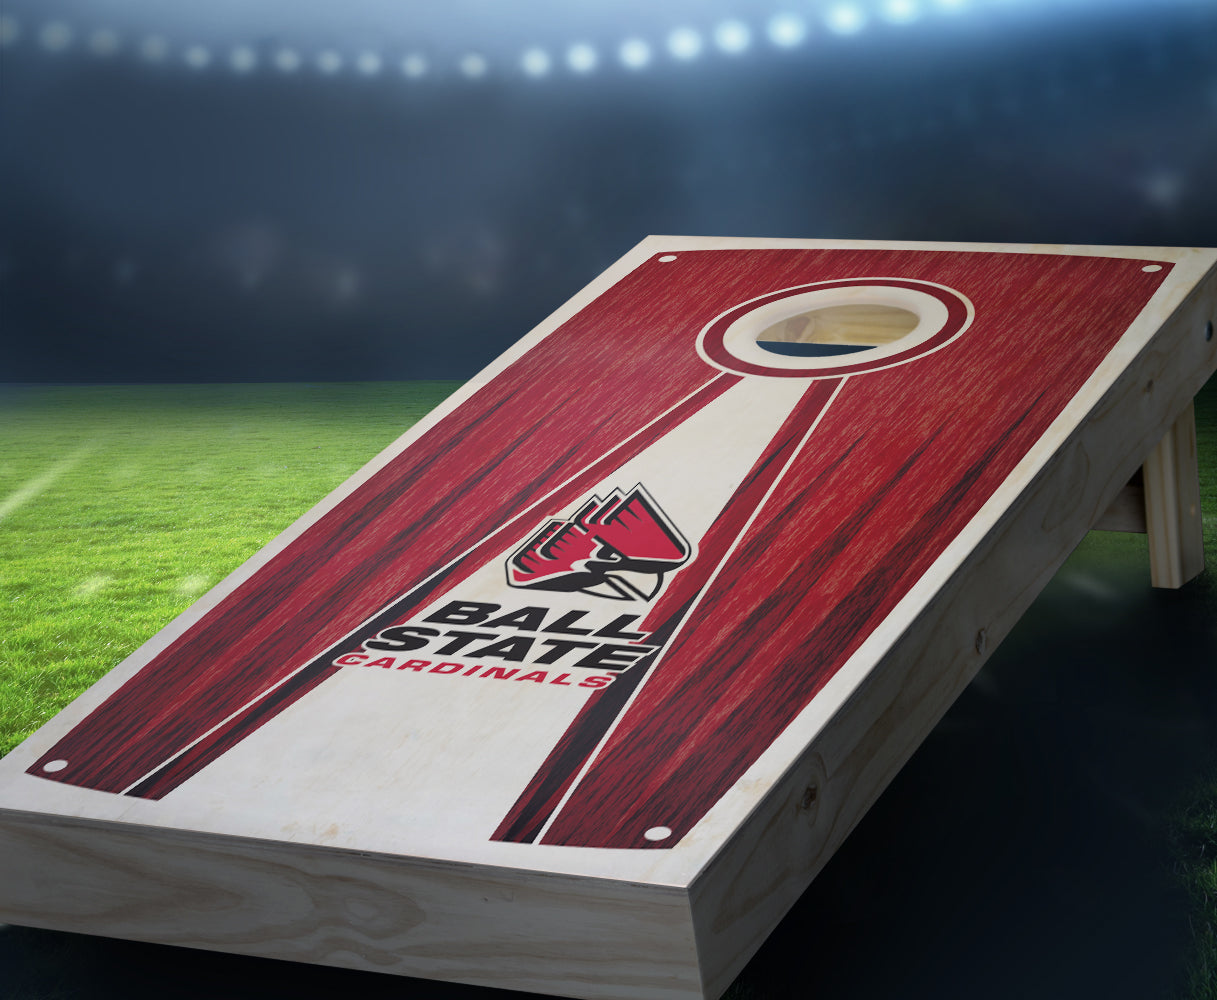 "Ball State Stained Pyramid" Cornhole Boards